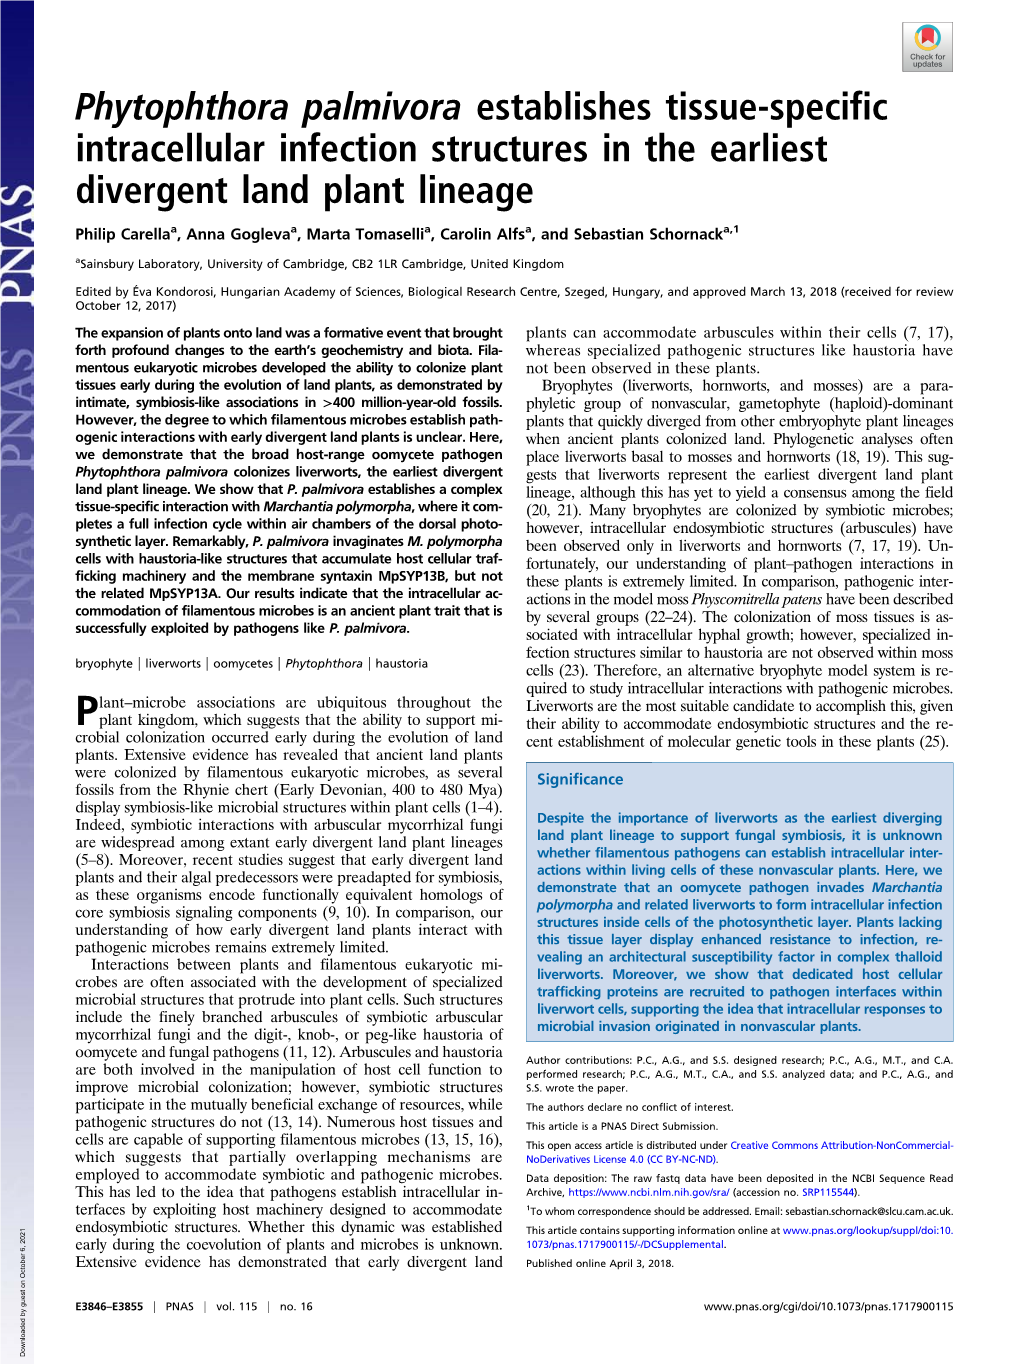 Phytophthora Palmivora Establishes Tissue-Specific Intracellular Infection Structures in the Earliest Divergent Land Plant Lineage